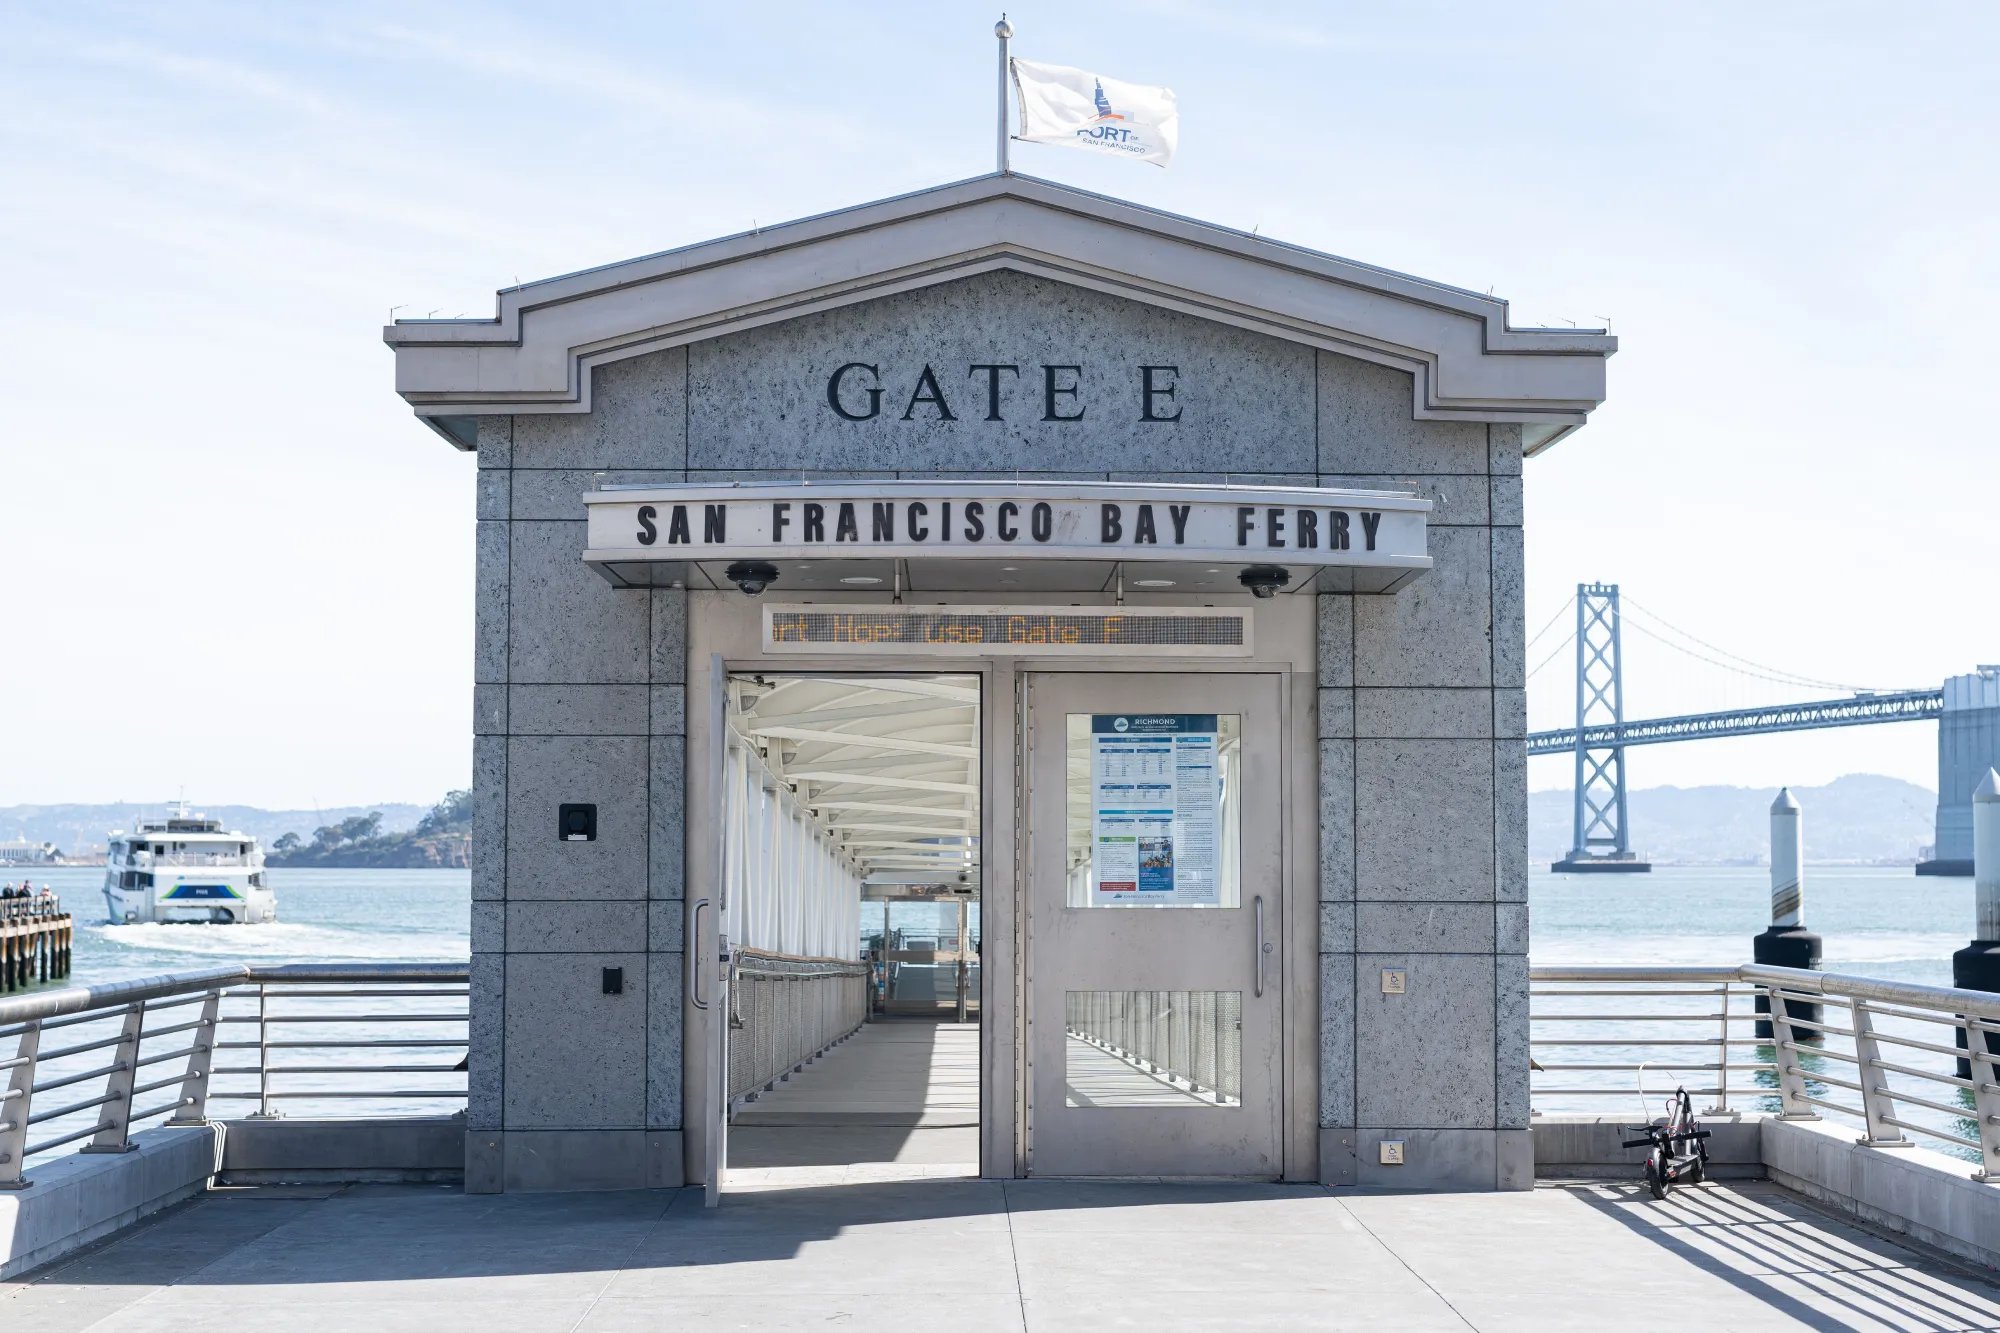 Gate E for San Francisco Bay Ferry at the San Francisco Ferry Building. There are two steel doors on the gate. One of the doors is open. On the left side of the gate a ferry boat departs from the dock. On the right of the gate, in the background, is the Bay Bridge. It is a clear, bright day.